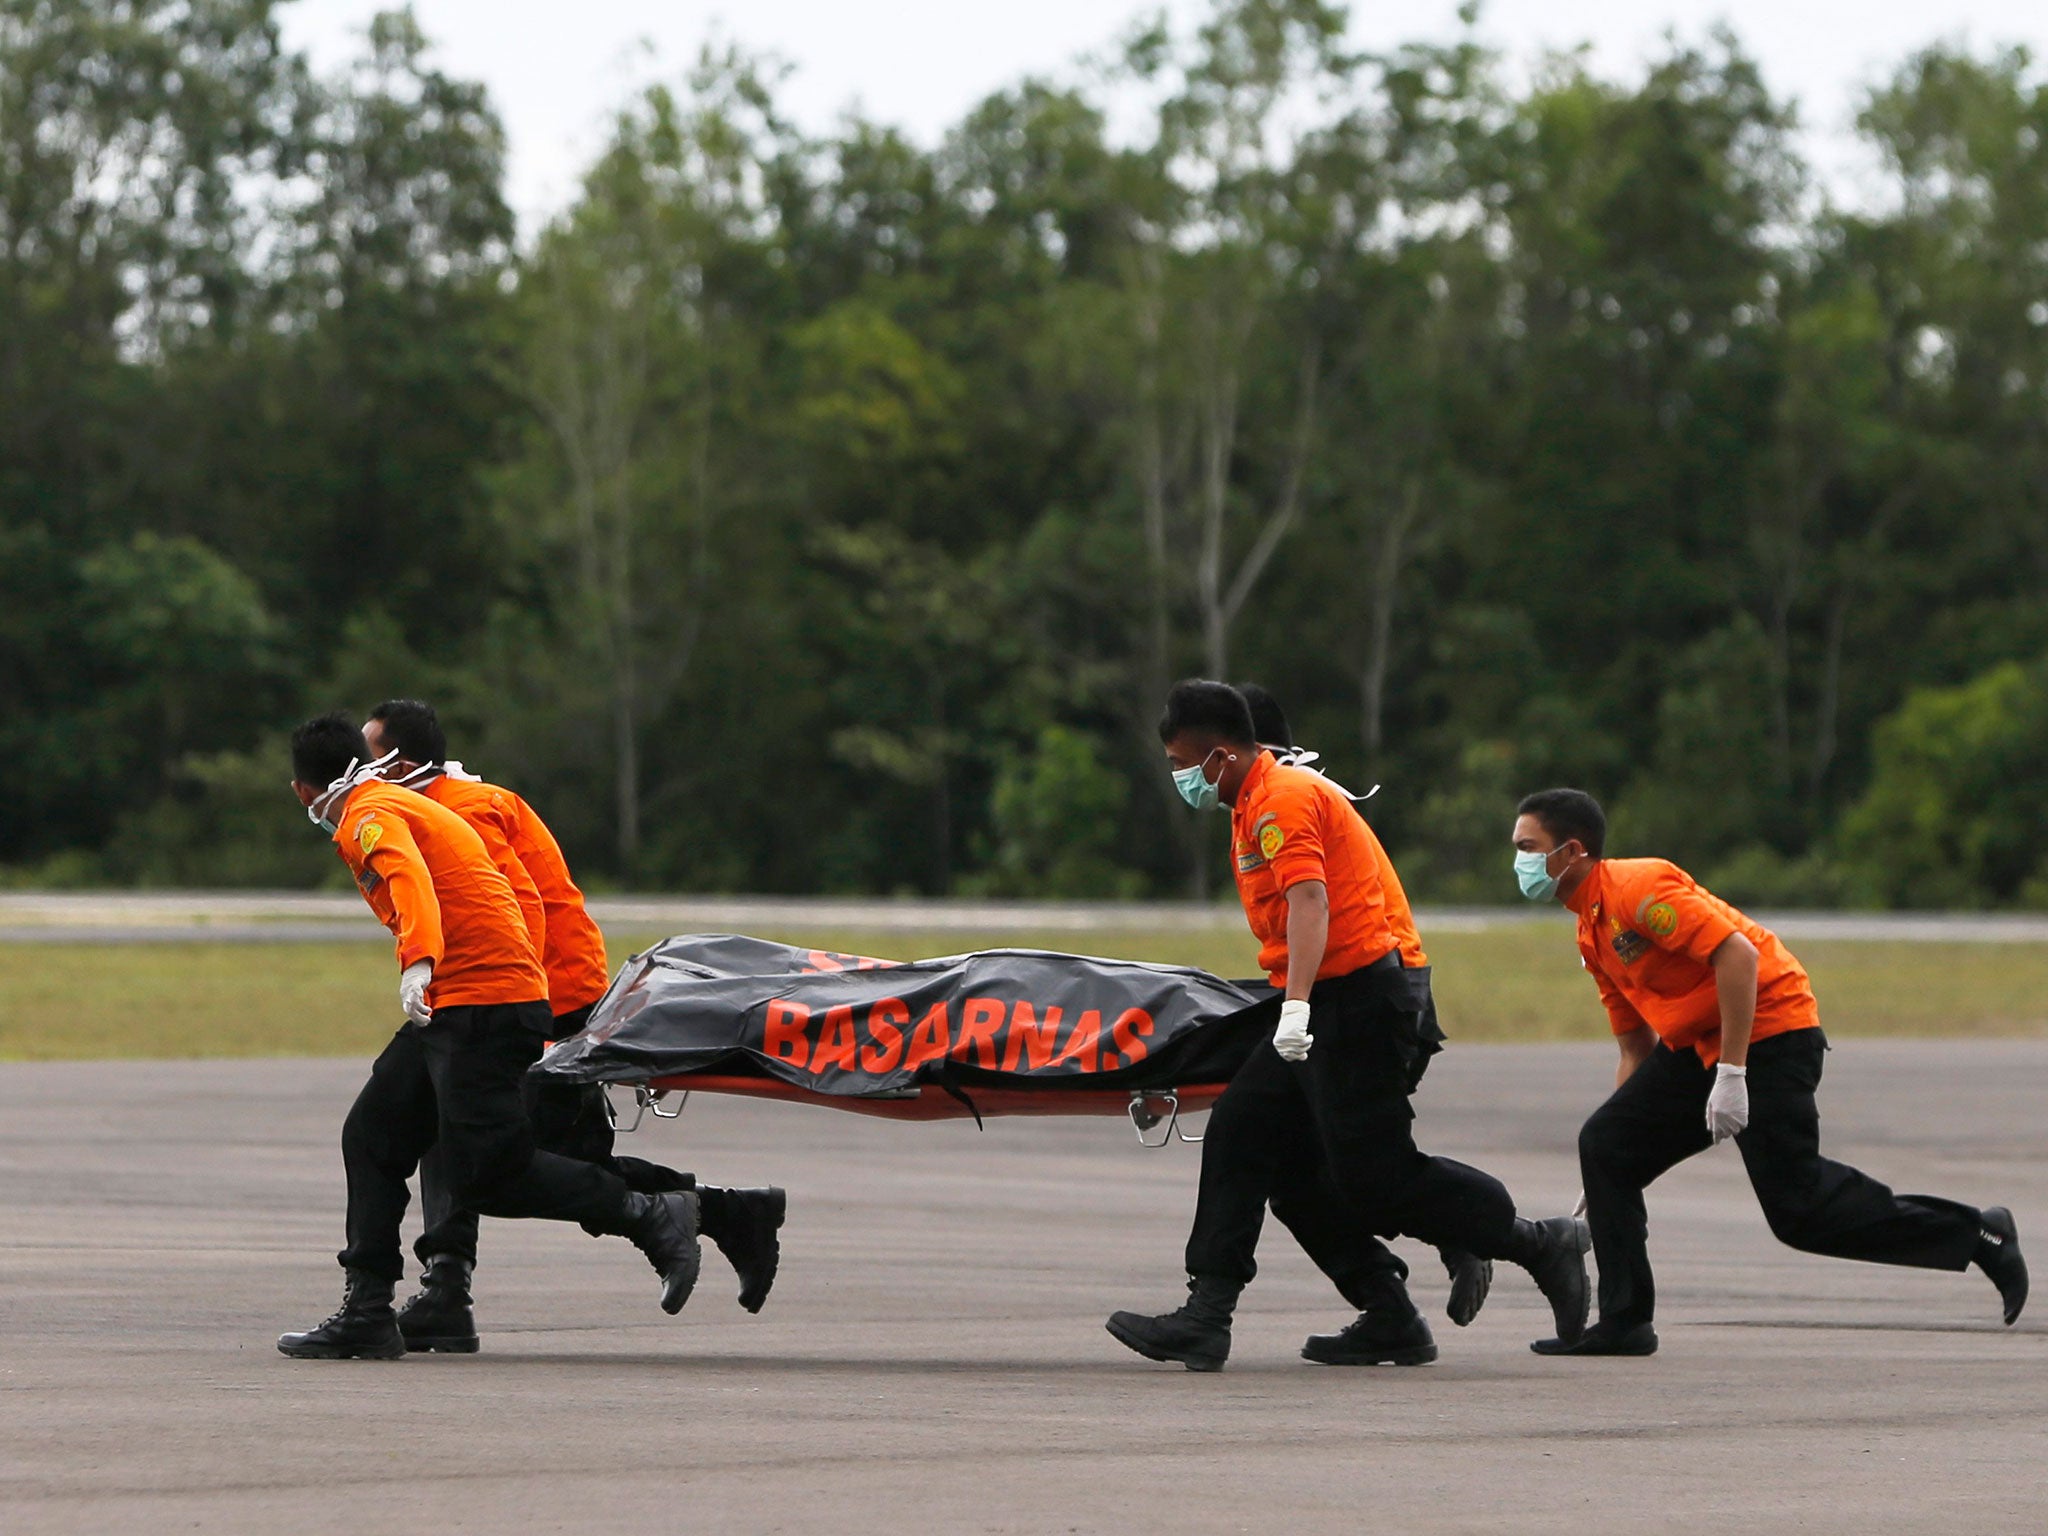 Airasia Flight Qz8501 Crash Body Recovered Wearing Life Jacket As Sonar Image Appears To Show 